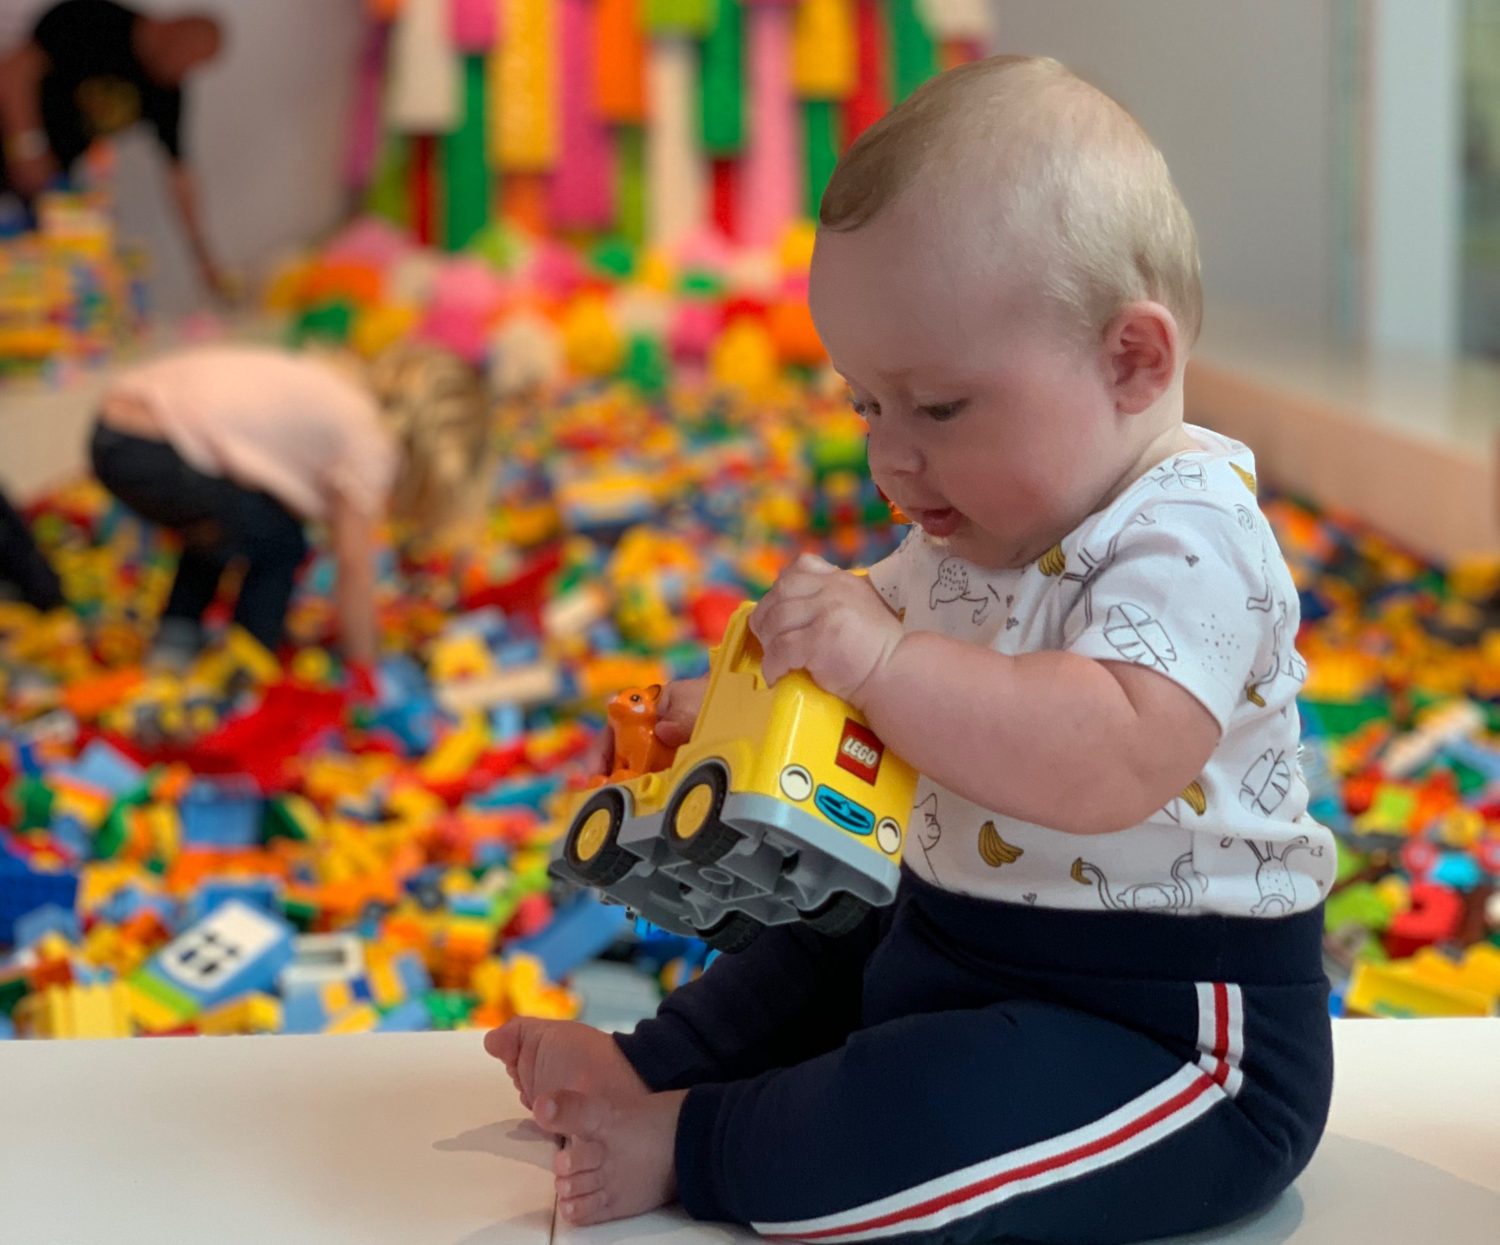 A 6 month old baby sat upright playing with LEGO at Lego House in Billund, Denmark